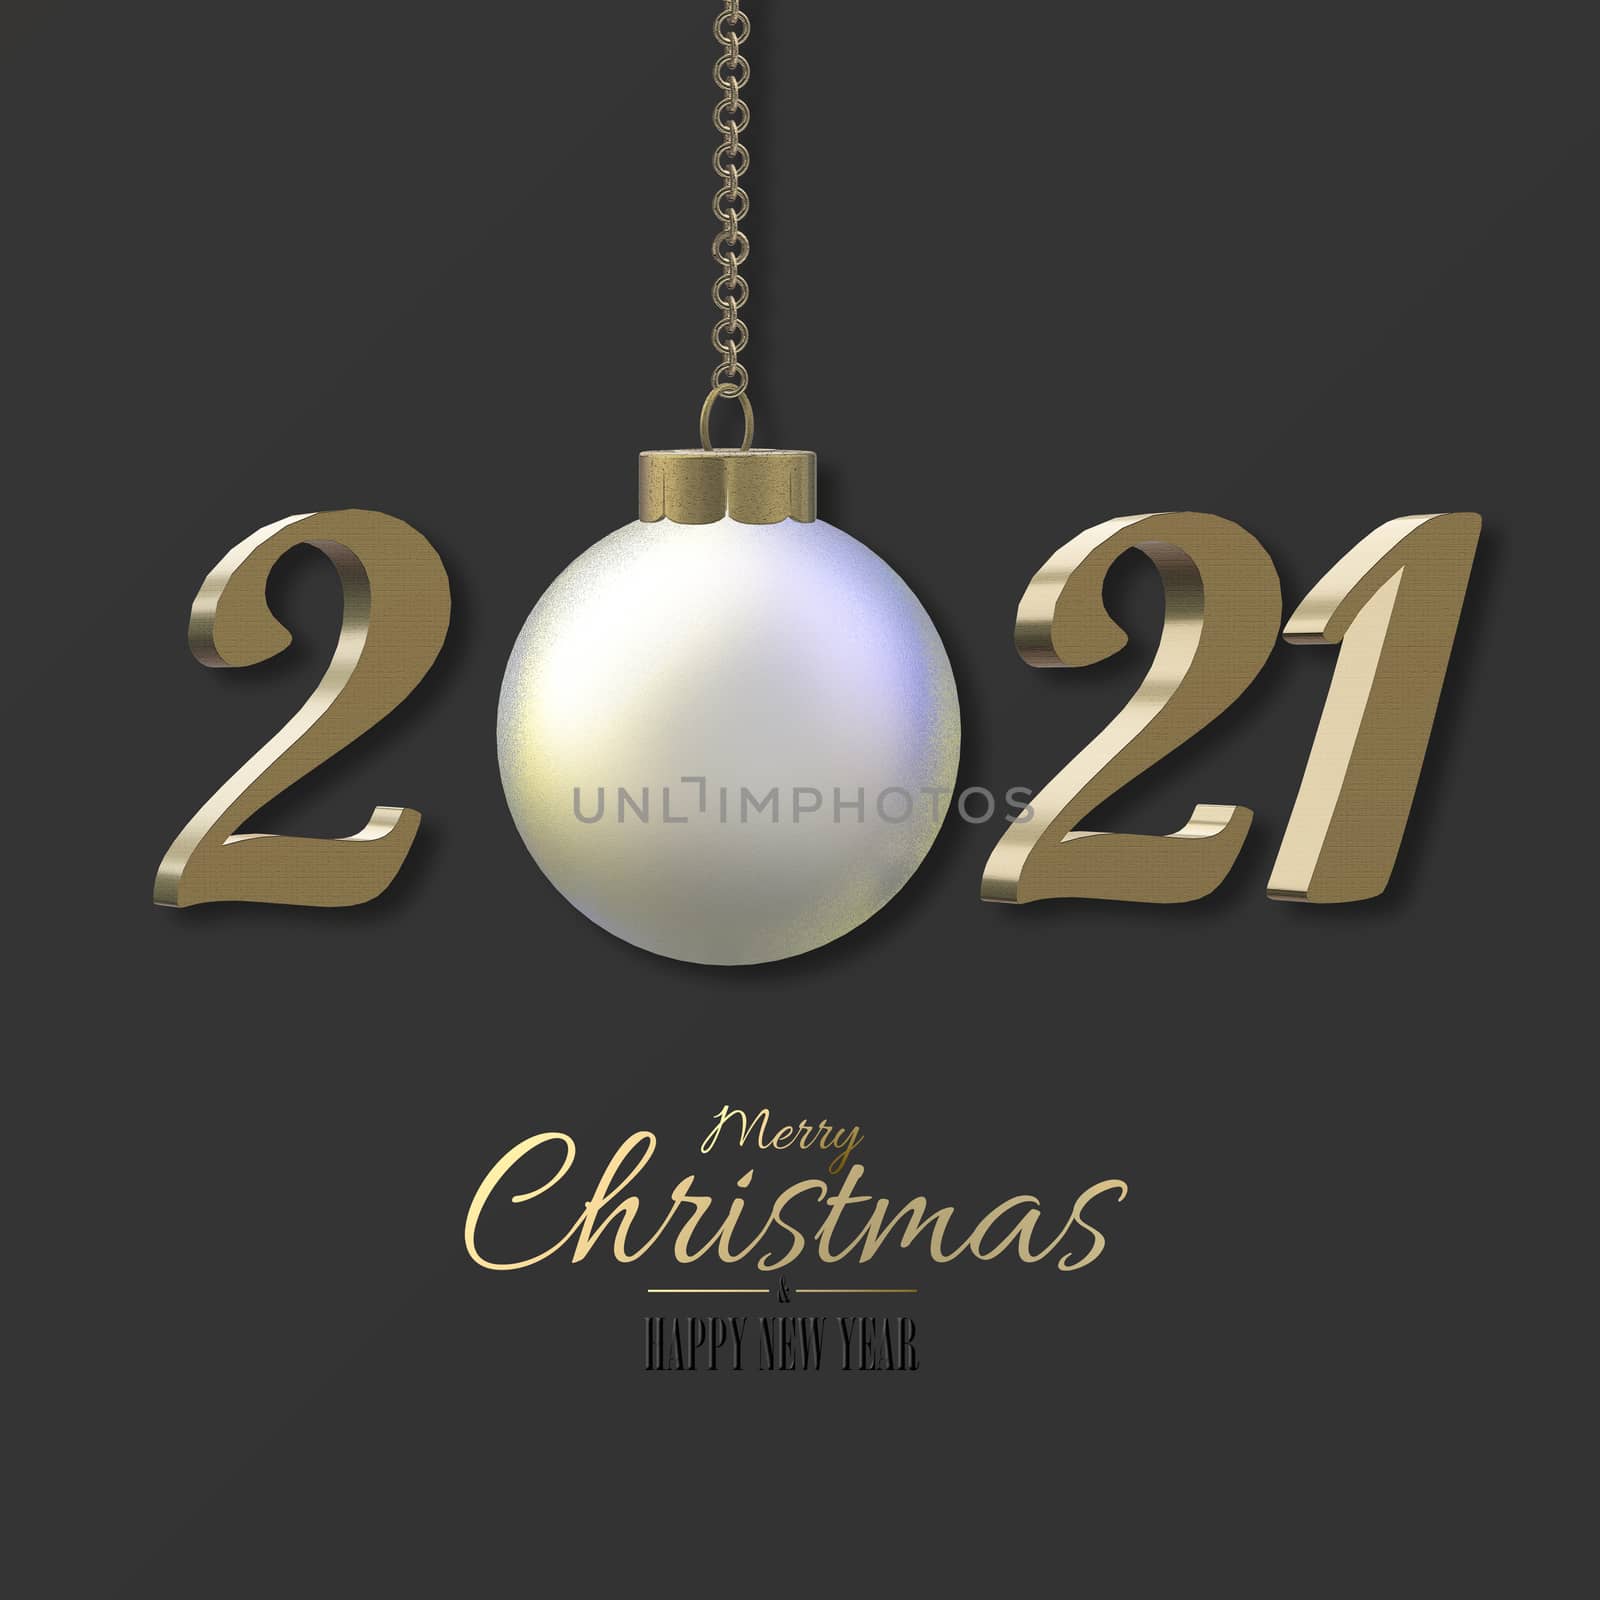 New Year holiday 2021 card. Gold 3D digit 2021 with 3D realistic ball bauble on black background. Text Merry Christmas Happy New Year